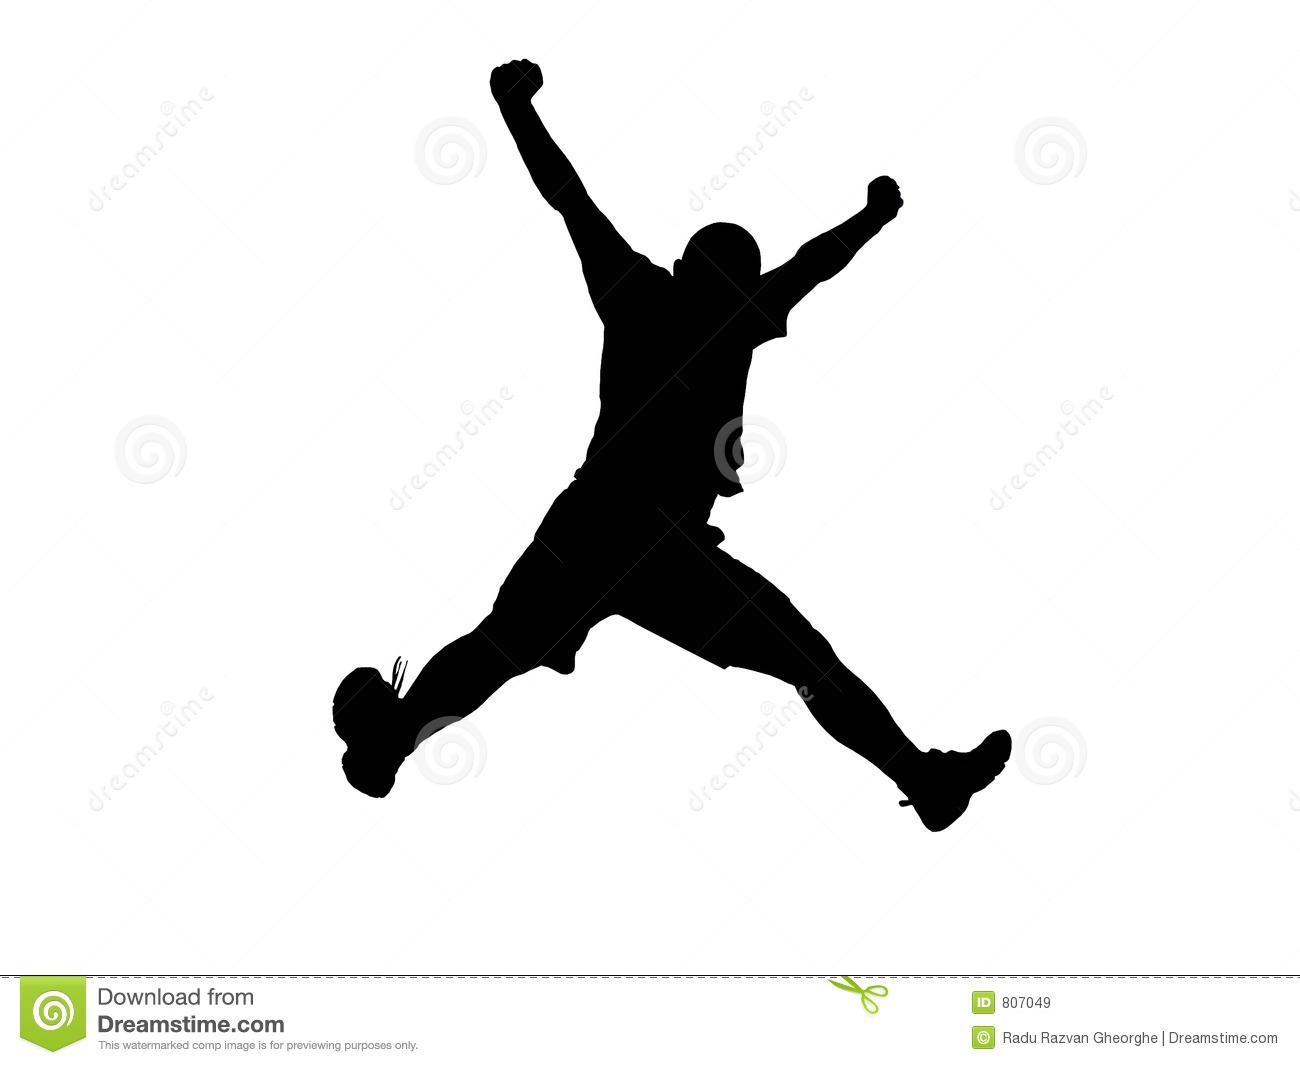 Jumping Silhouette Royalty Free Stock Images   Image  807049